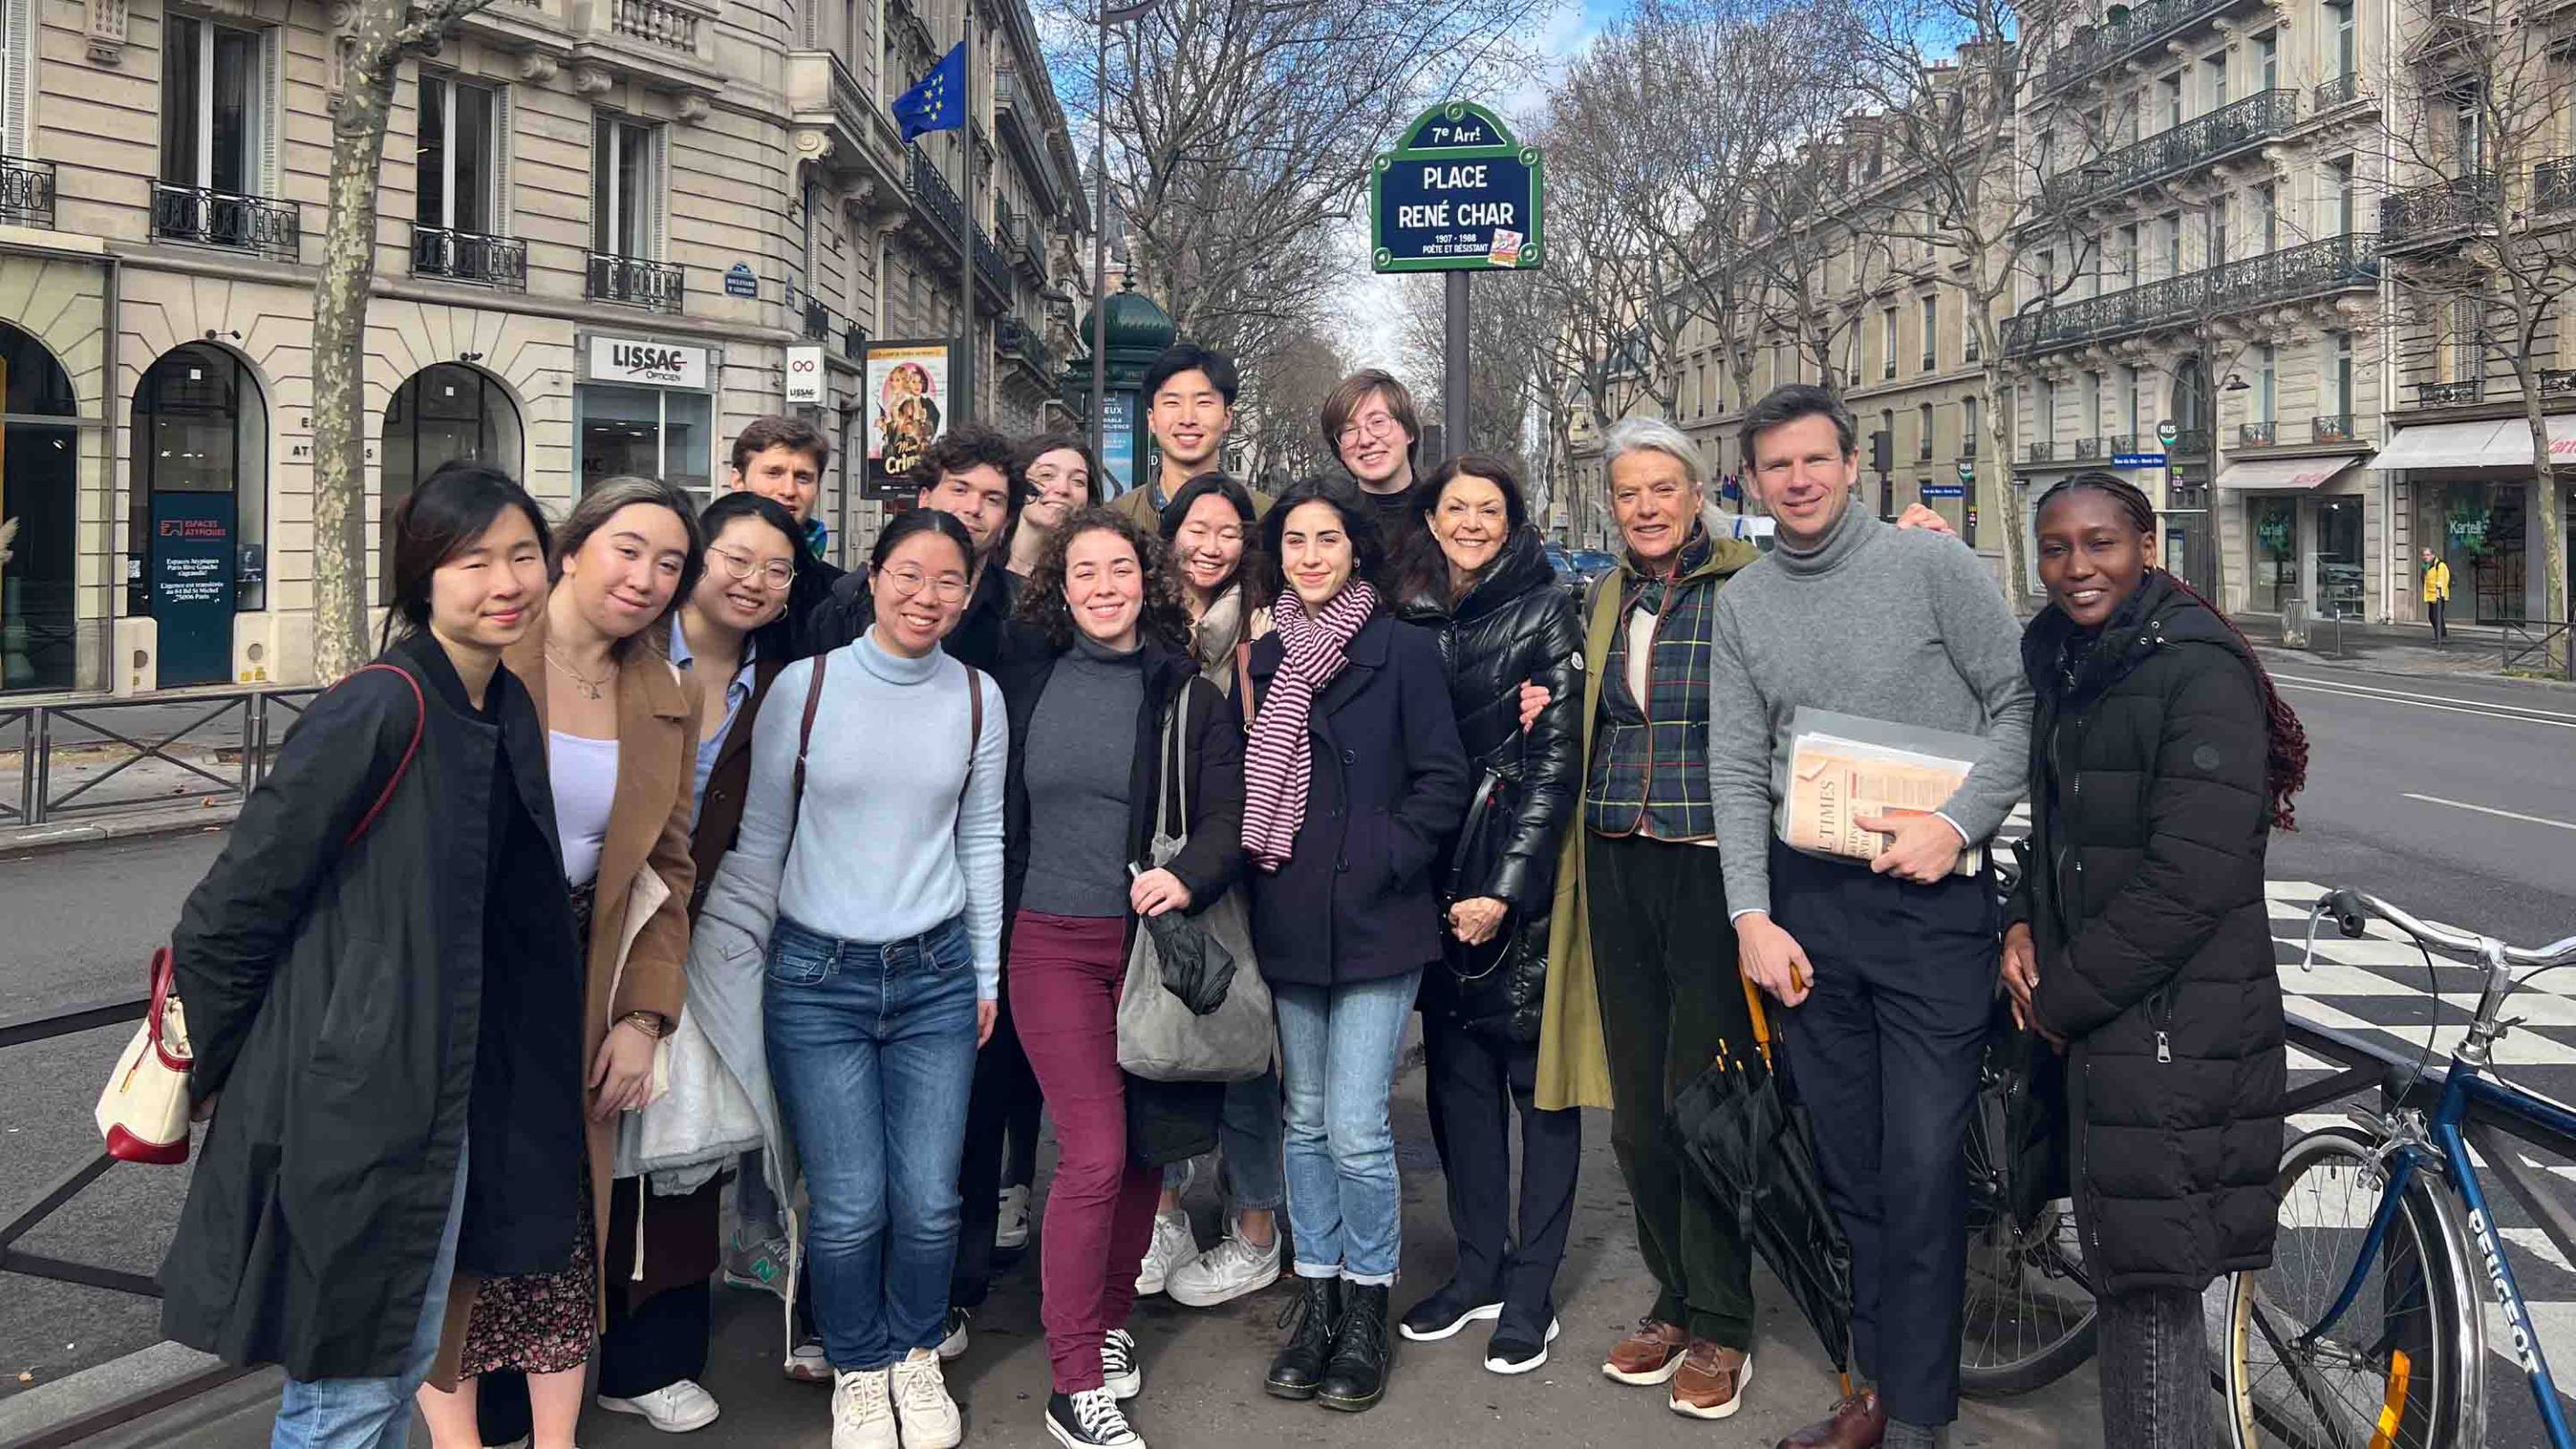 During a spring break trip to France, the group stops in front of the “Place René Char” street sign in central Paris. It reads ’